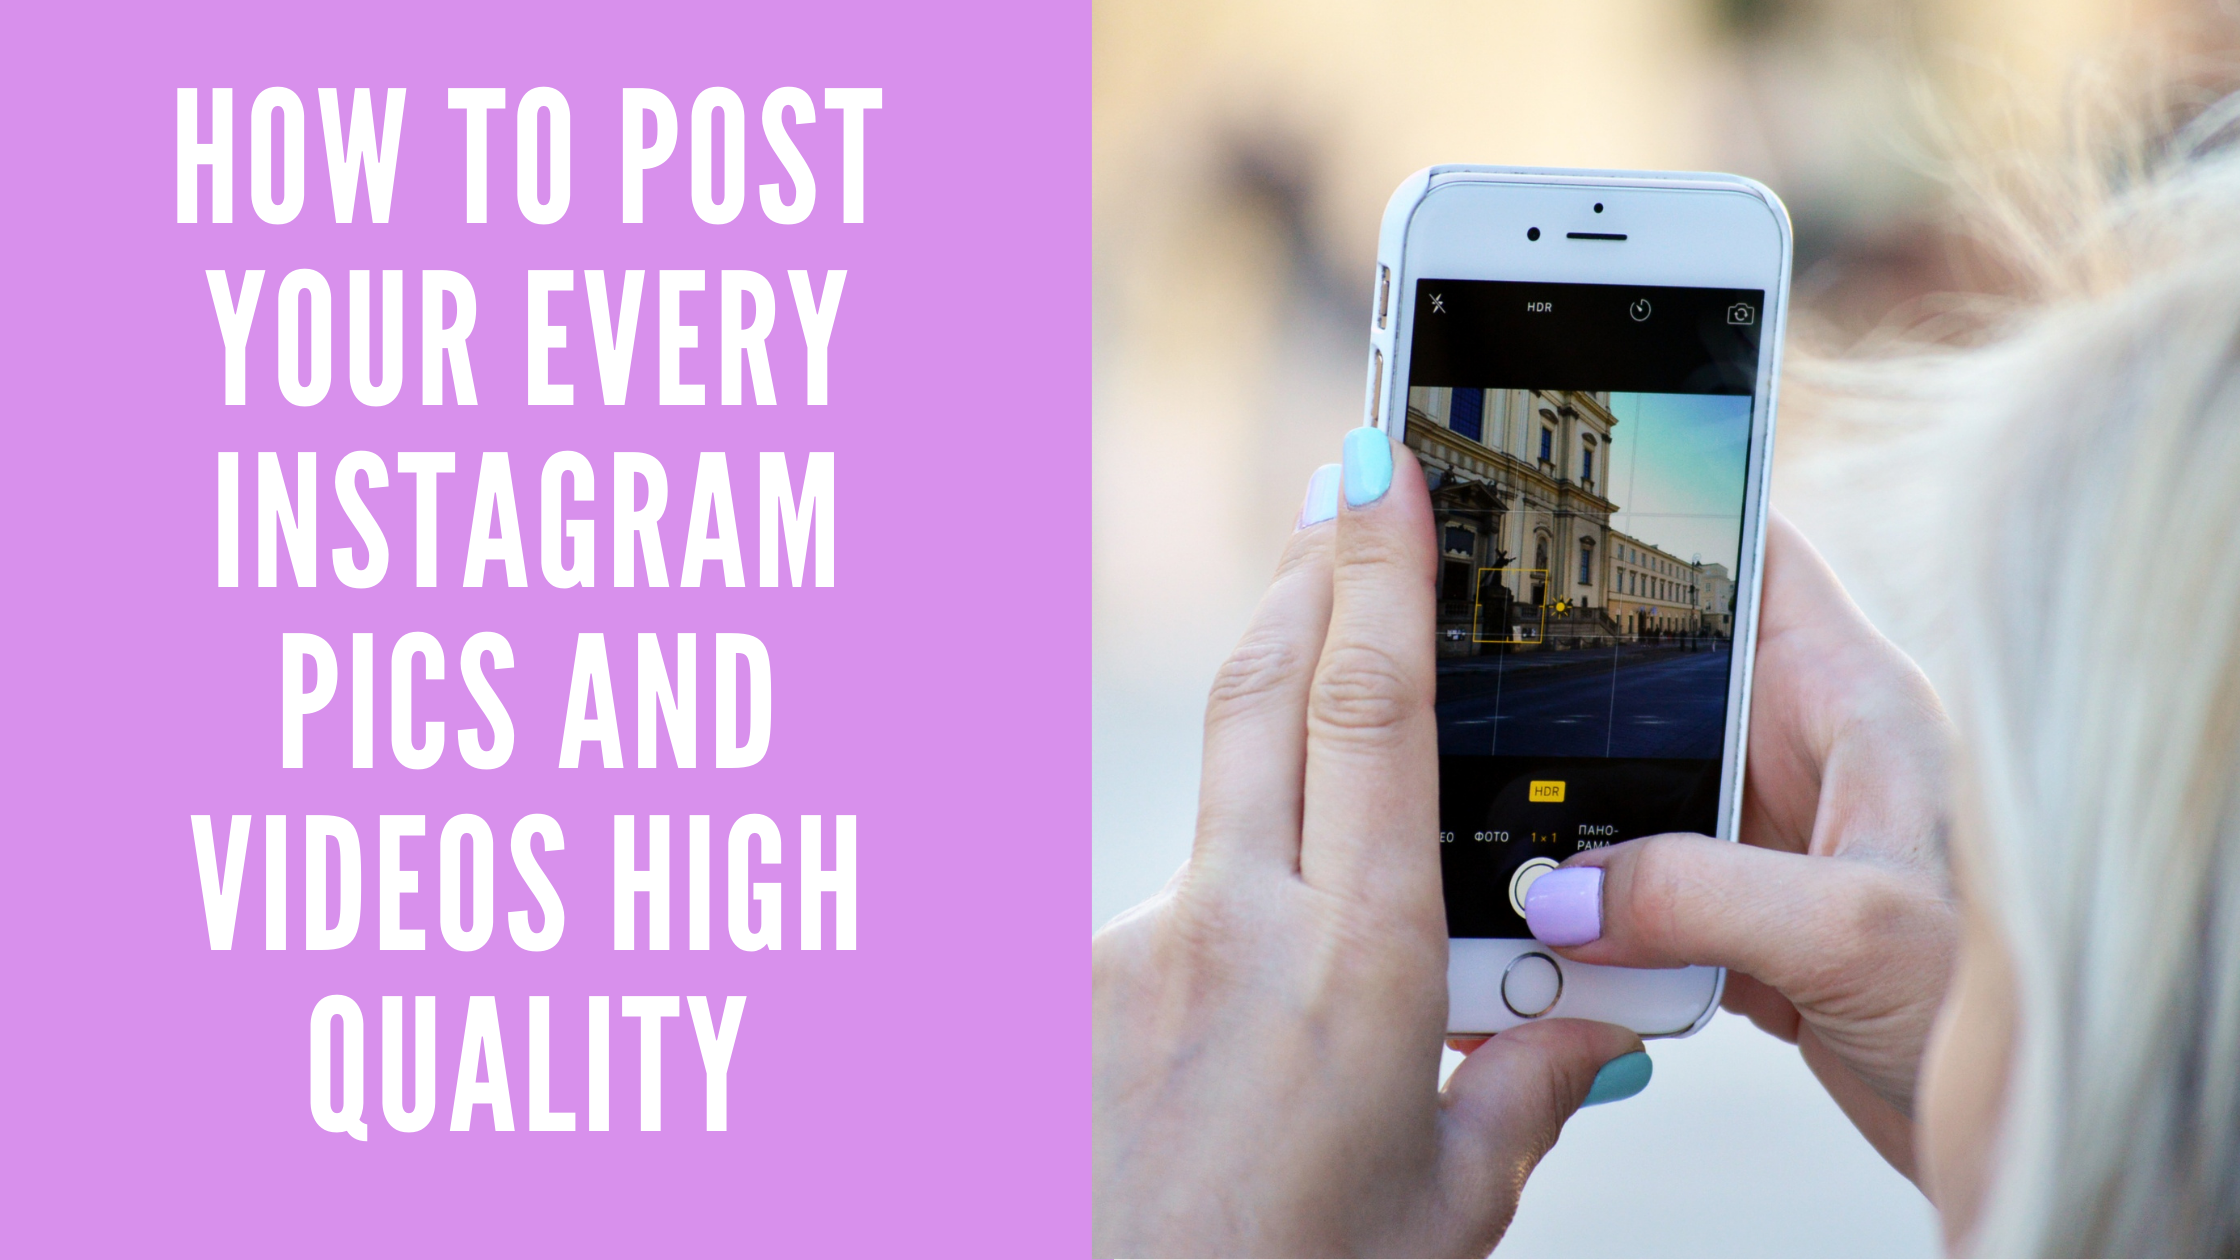 How To Post Your Every Instagram Pics and Videos High Quality